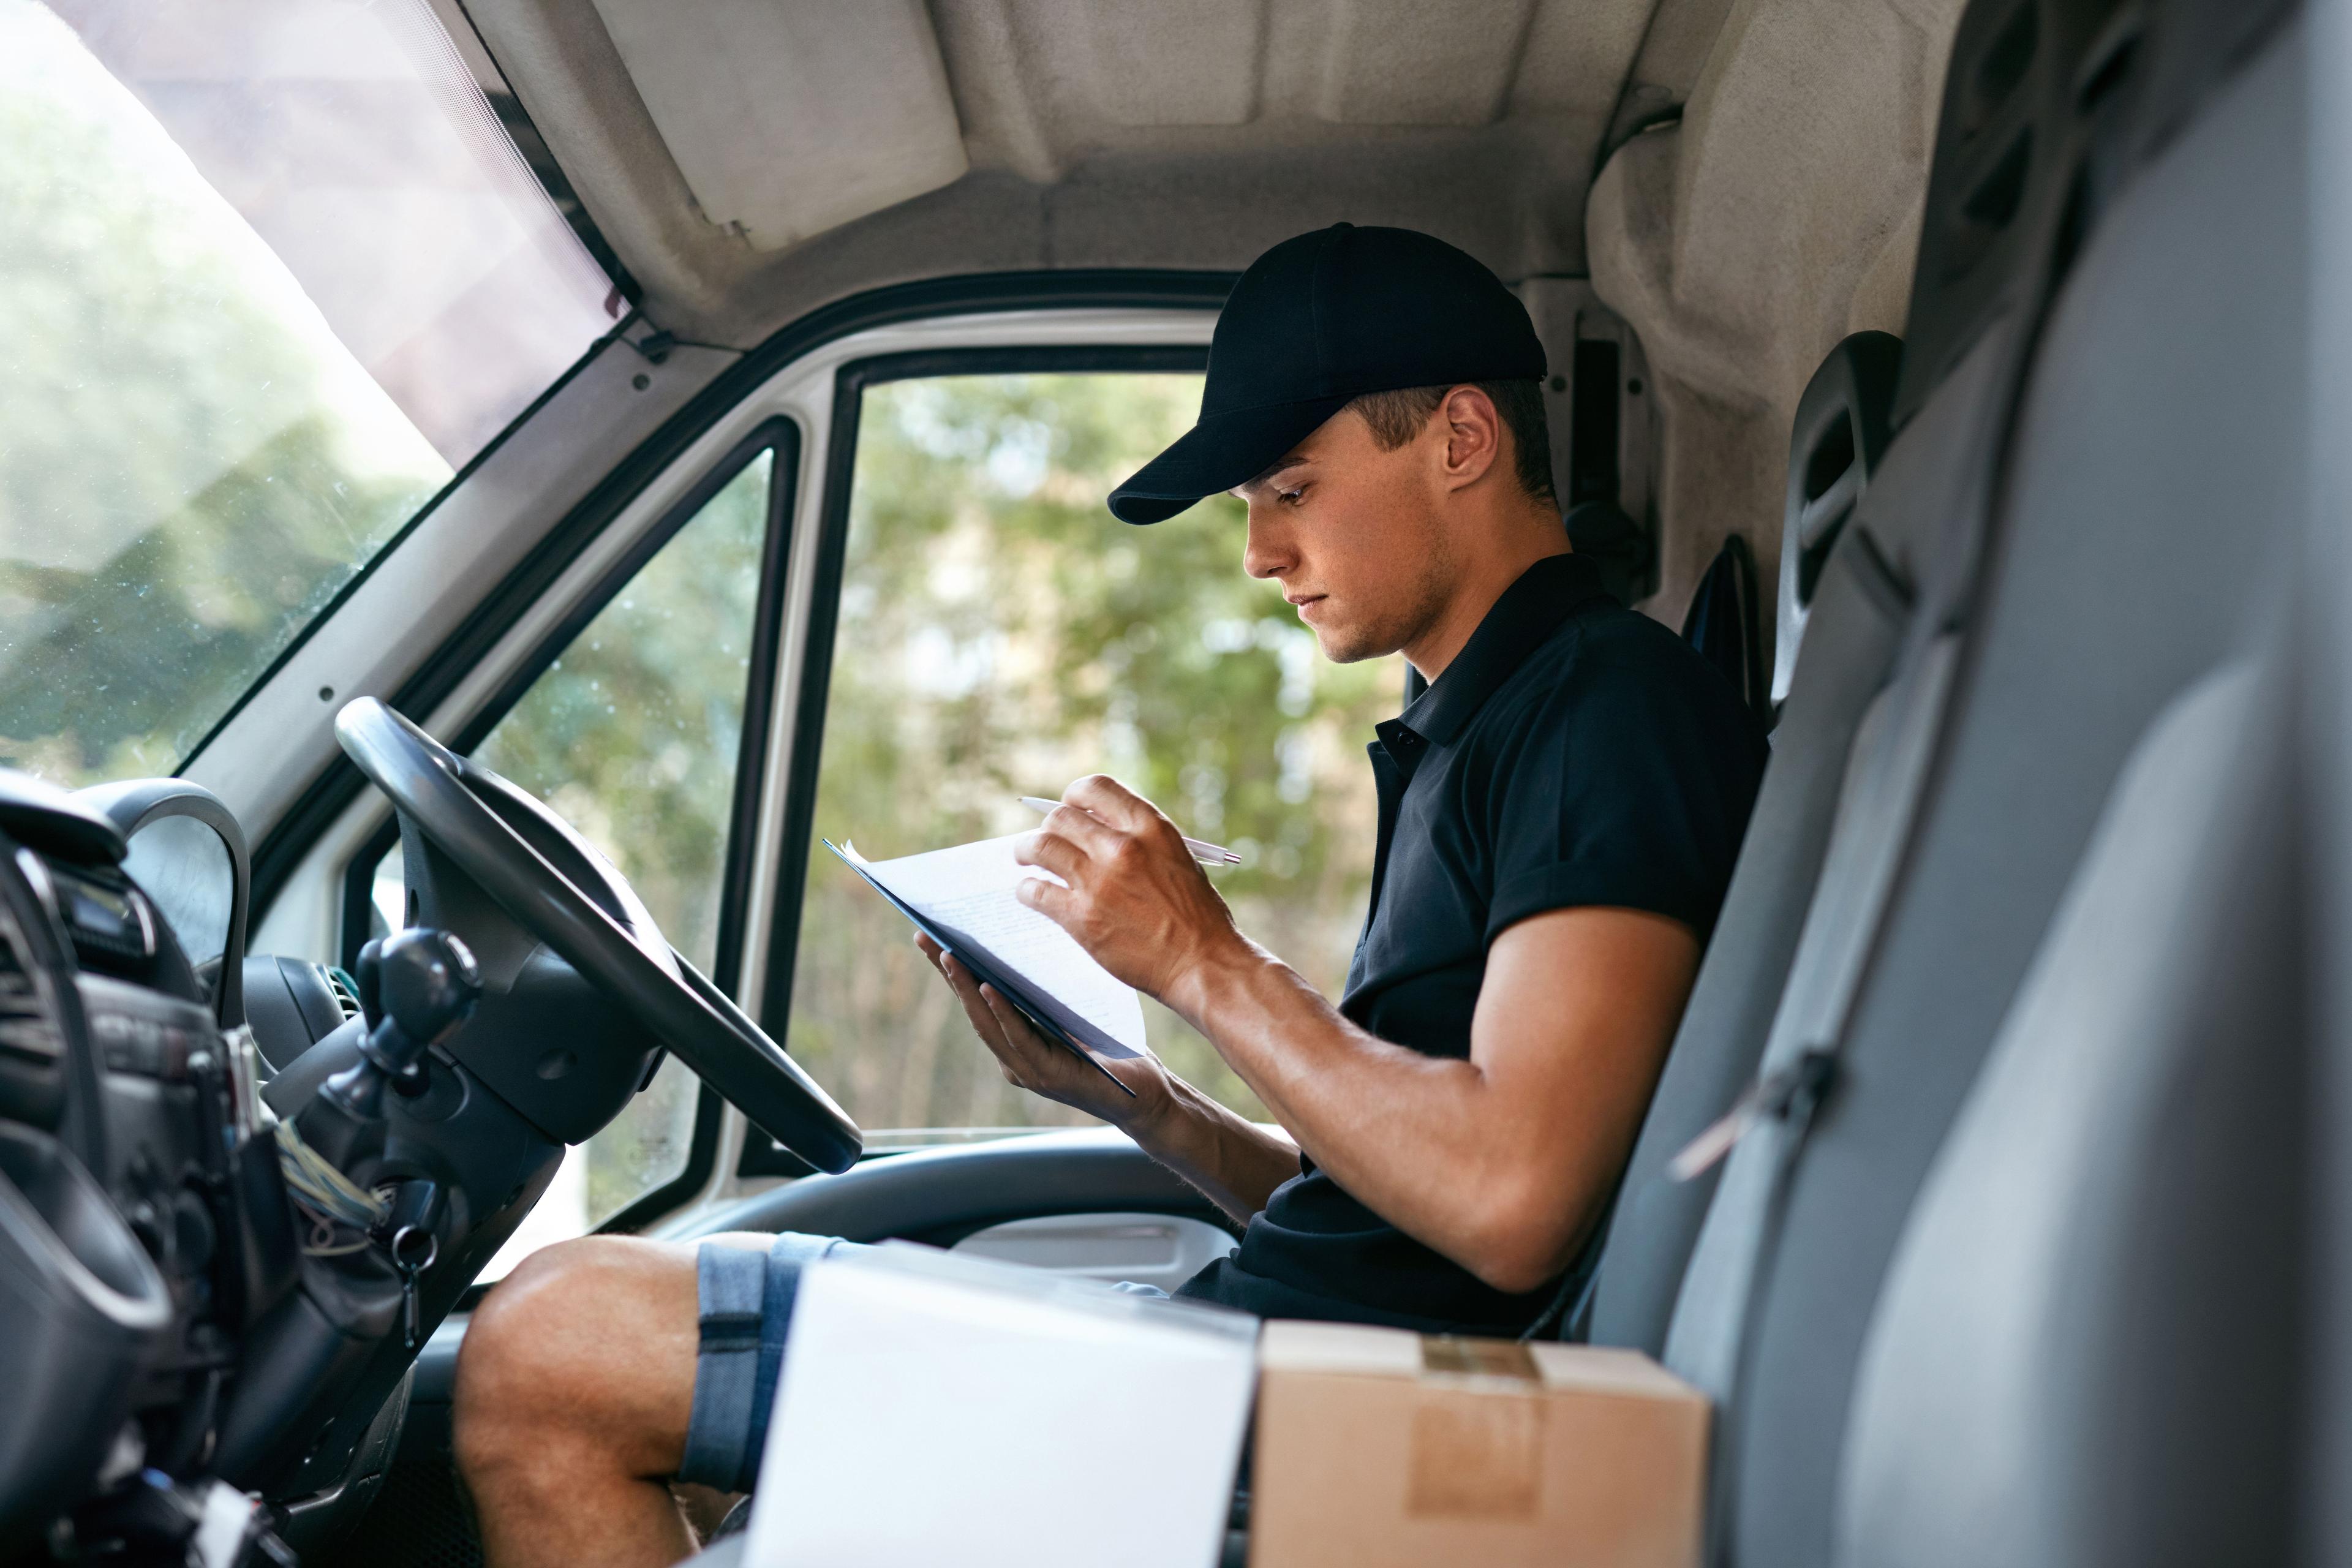 Courier driver in the front seat of their van looking over paperwork